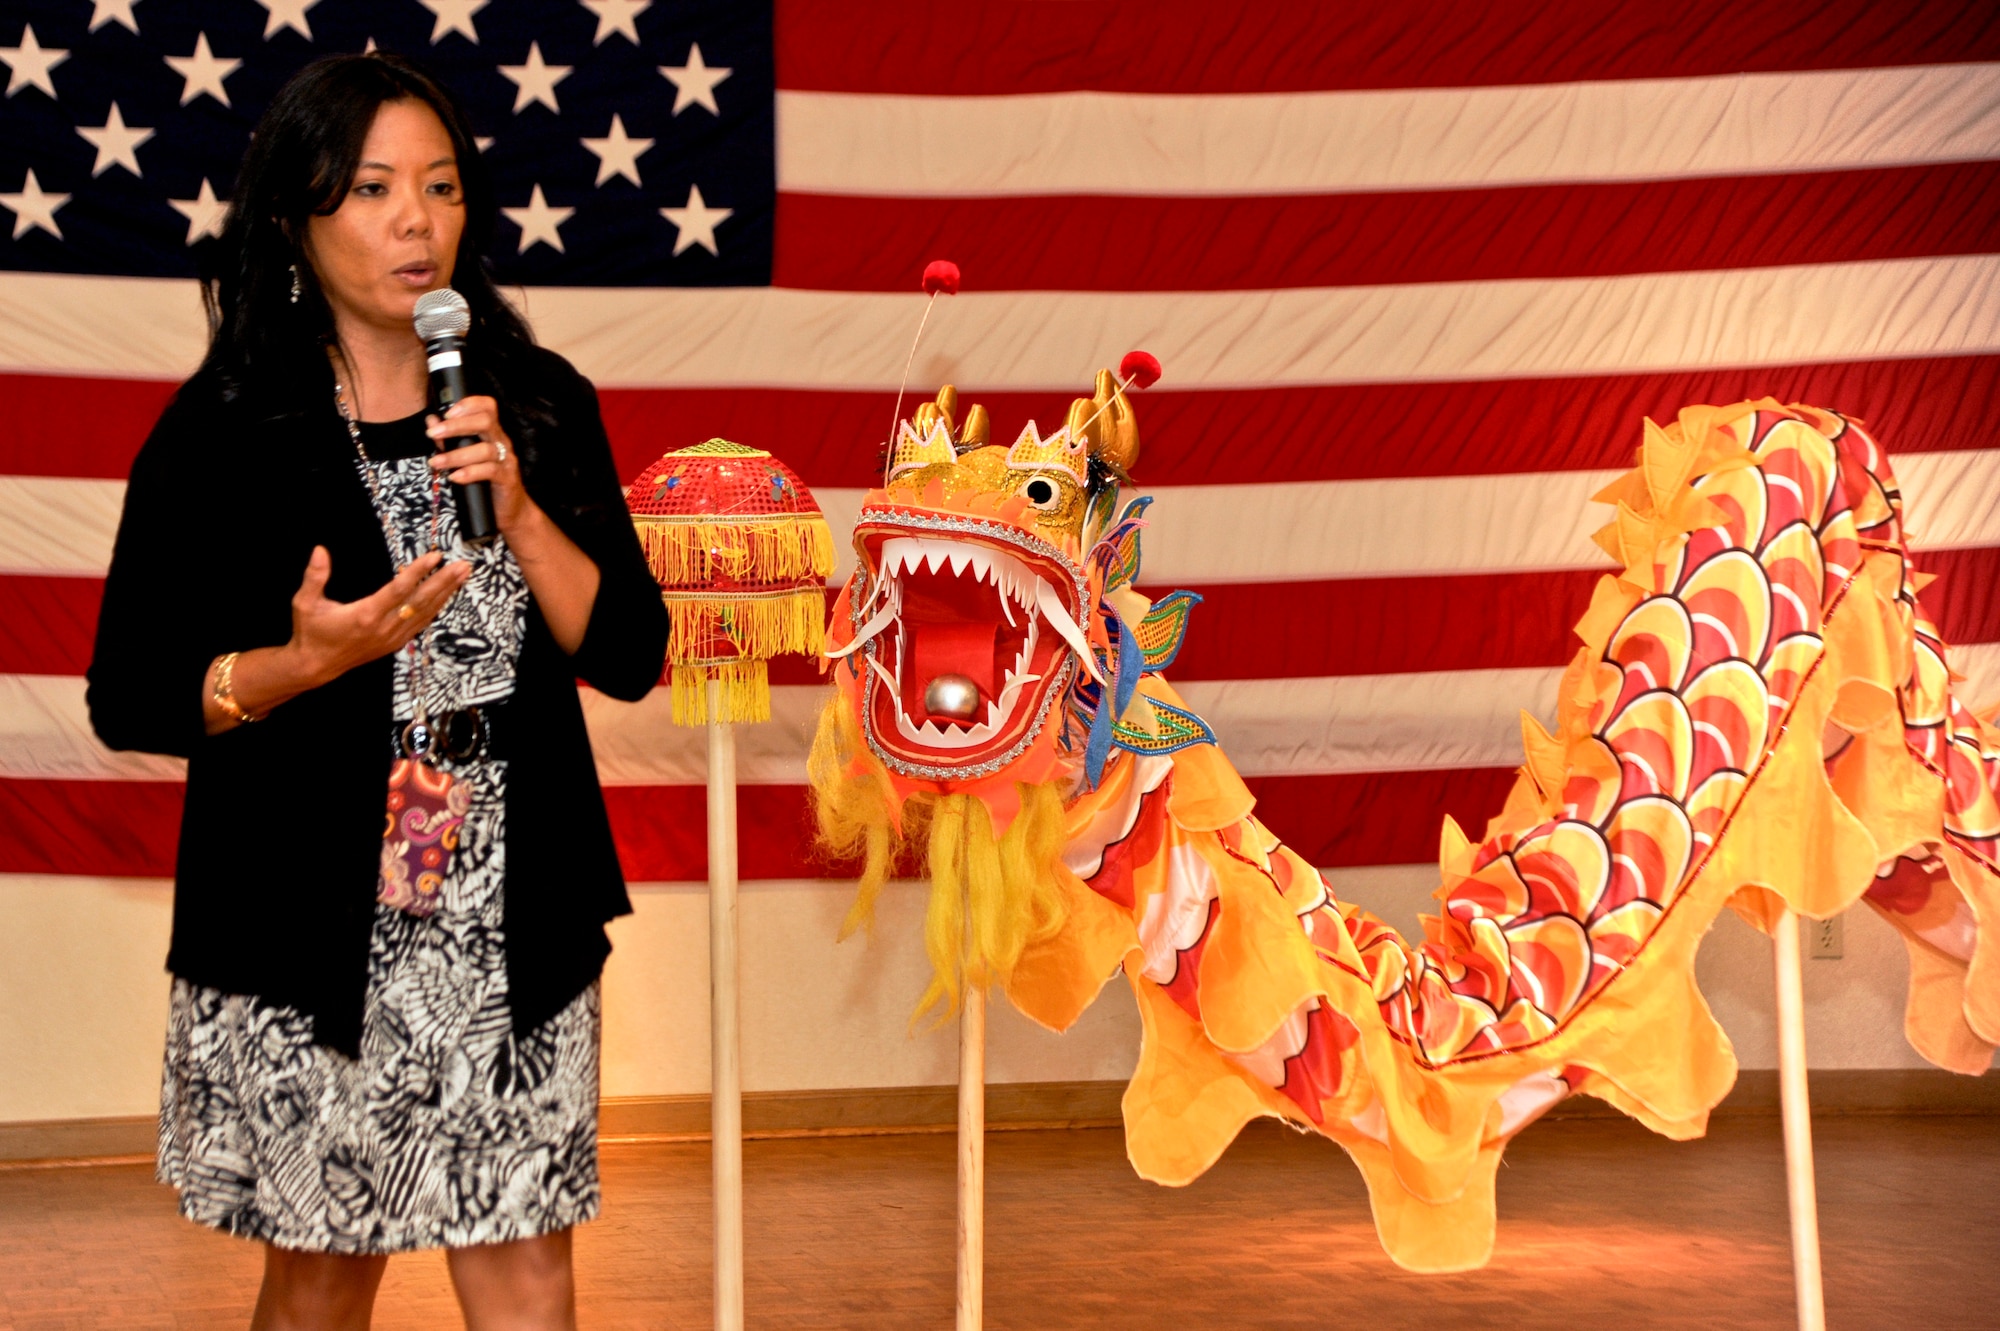 VANDENBERG AIR FORCE BASE, Calif. – Pauline Chui, 30th Space Wing Outreach Program manager, speaks about the Chinese New Year during this year’s annual Cultural Diversity Day at the Pacific Coast Club here Wednesday, Aug. 21, 2013. Diversity Day is the culmination of all the Department of Defense recognized monthly observances into one event. (U.S. Air Force photo/Senior Airman Lael Huss)